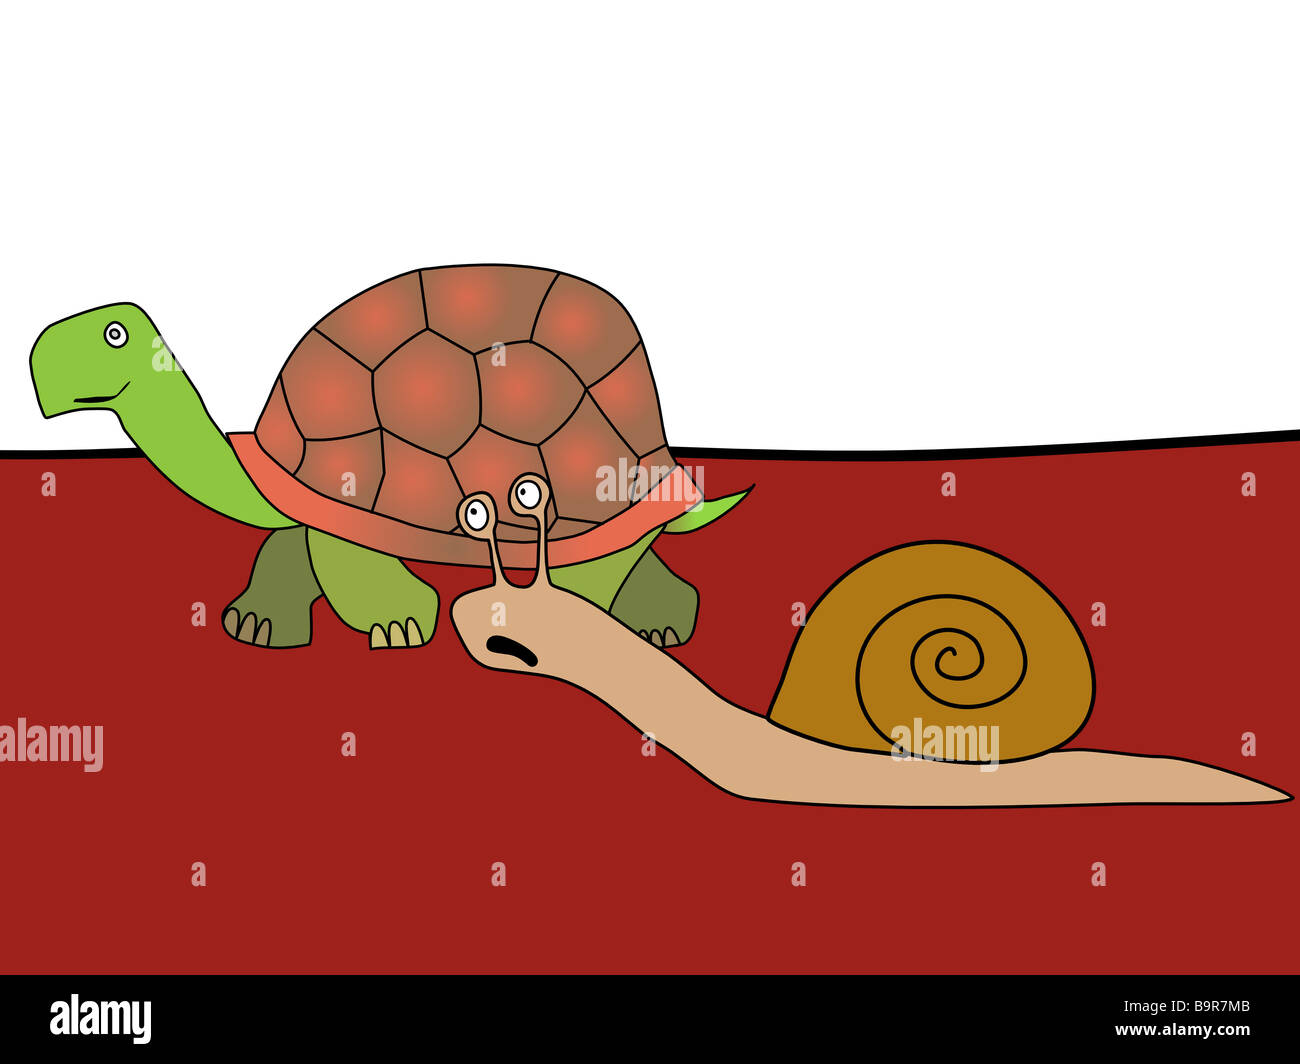 Fast and furious - humorous cartoon drawing. Snail and tortoise. Slowpoke and express. Hand drawing. Stock Photo